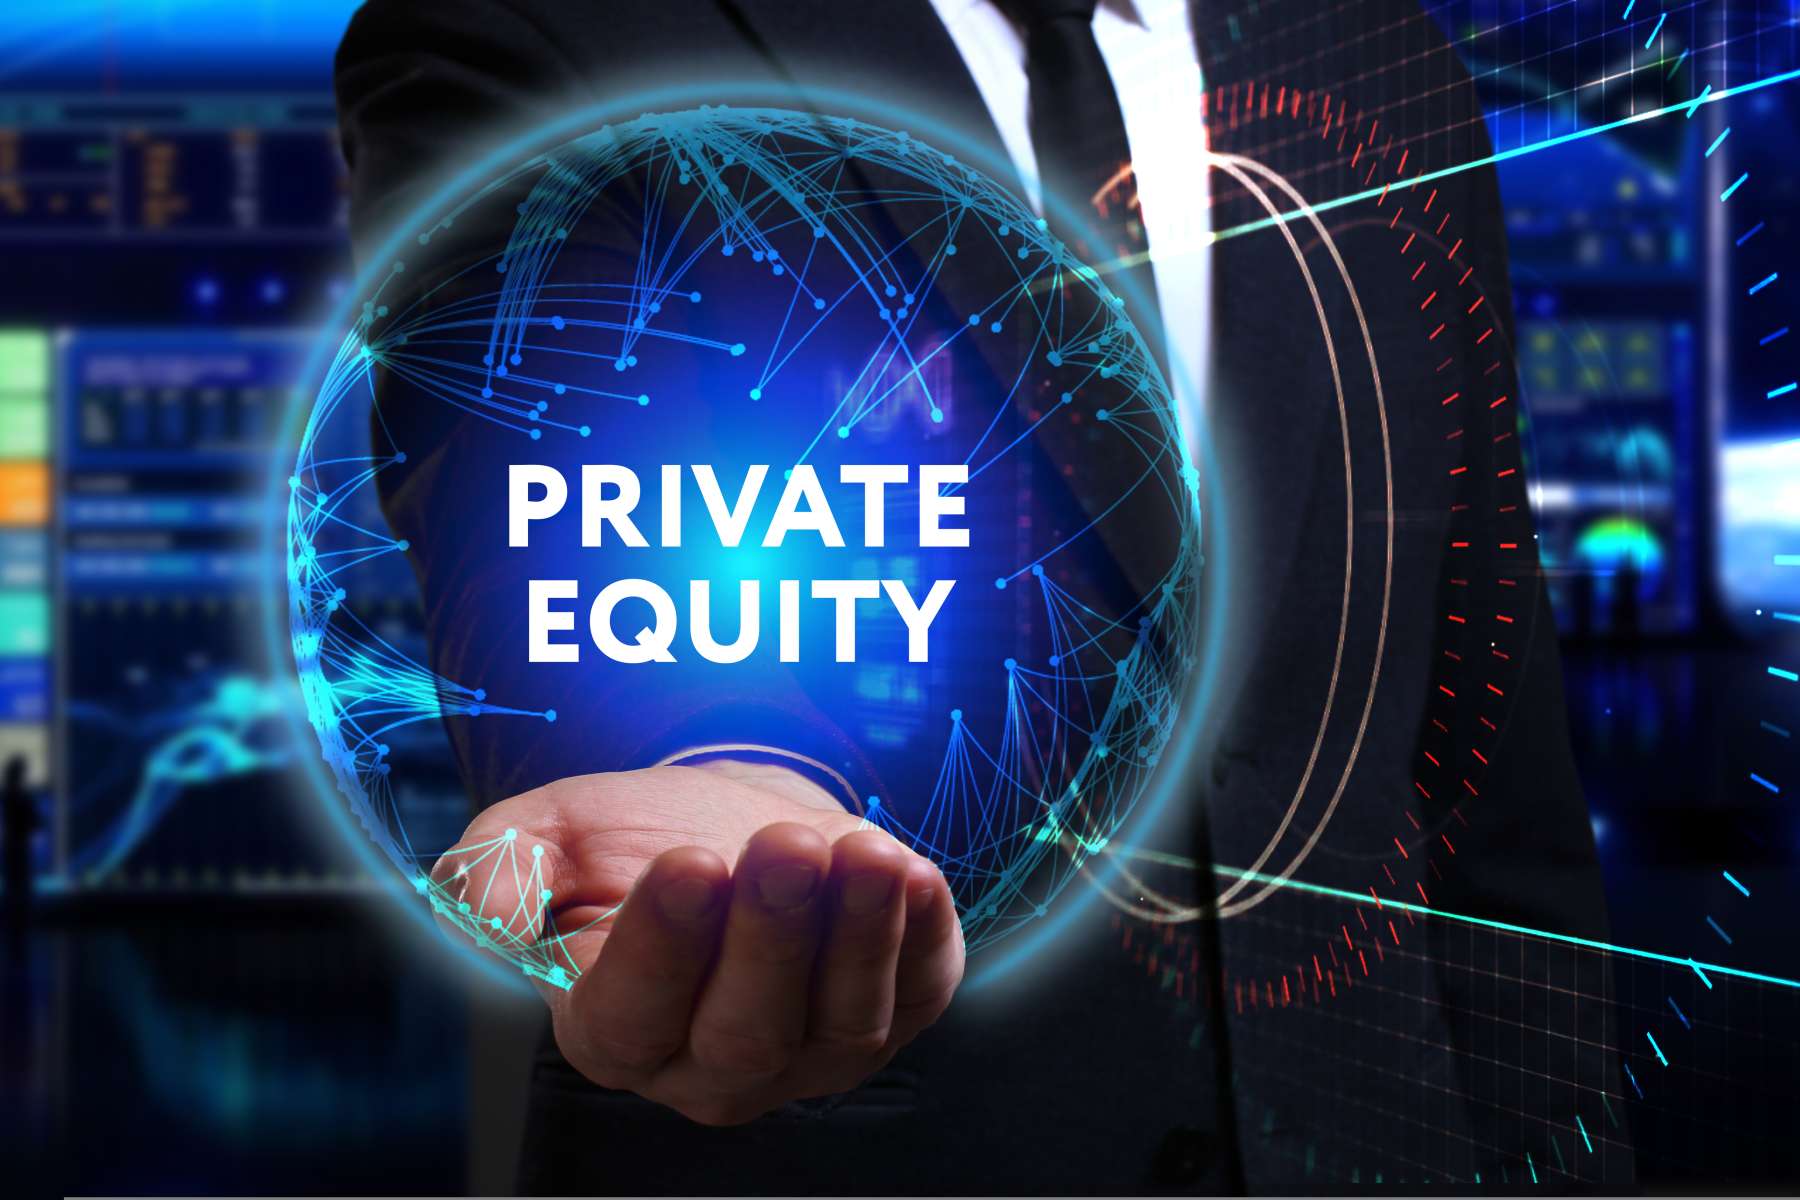 How Private Equity Works